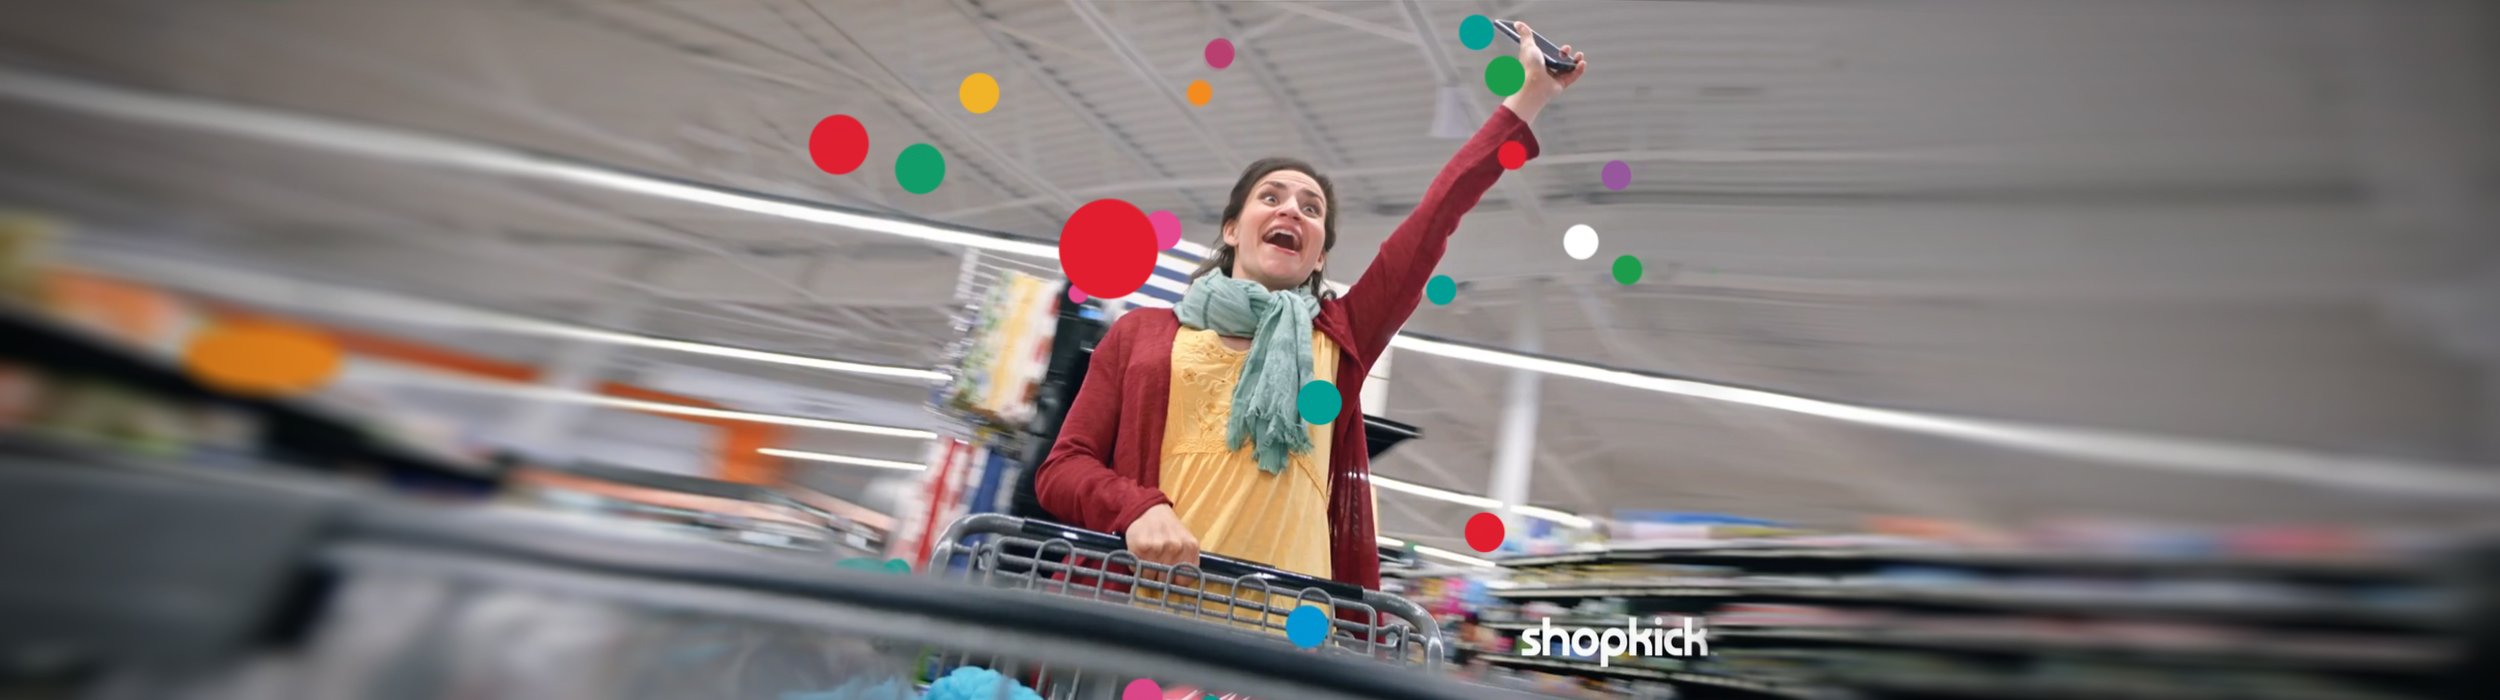 Shopkick launches TV campaign with agency Marketing Architects